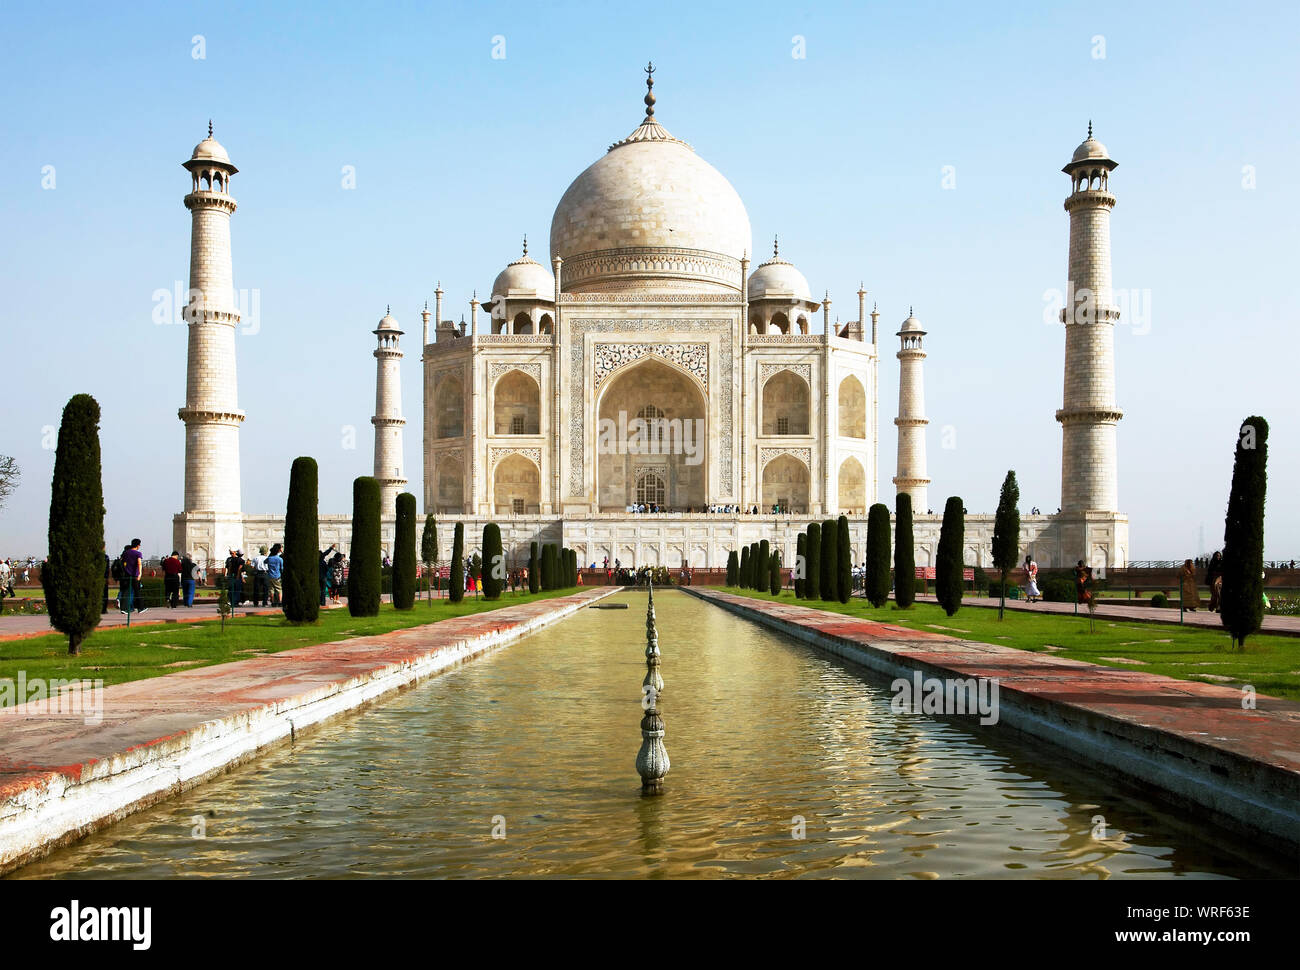 Low Angle View Of Taj Mahal In Front Of Reflecting Pool Against Clear Sky Stock Photo